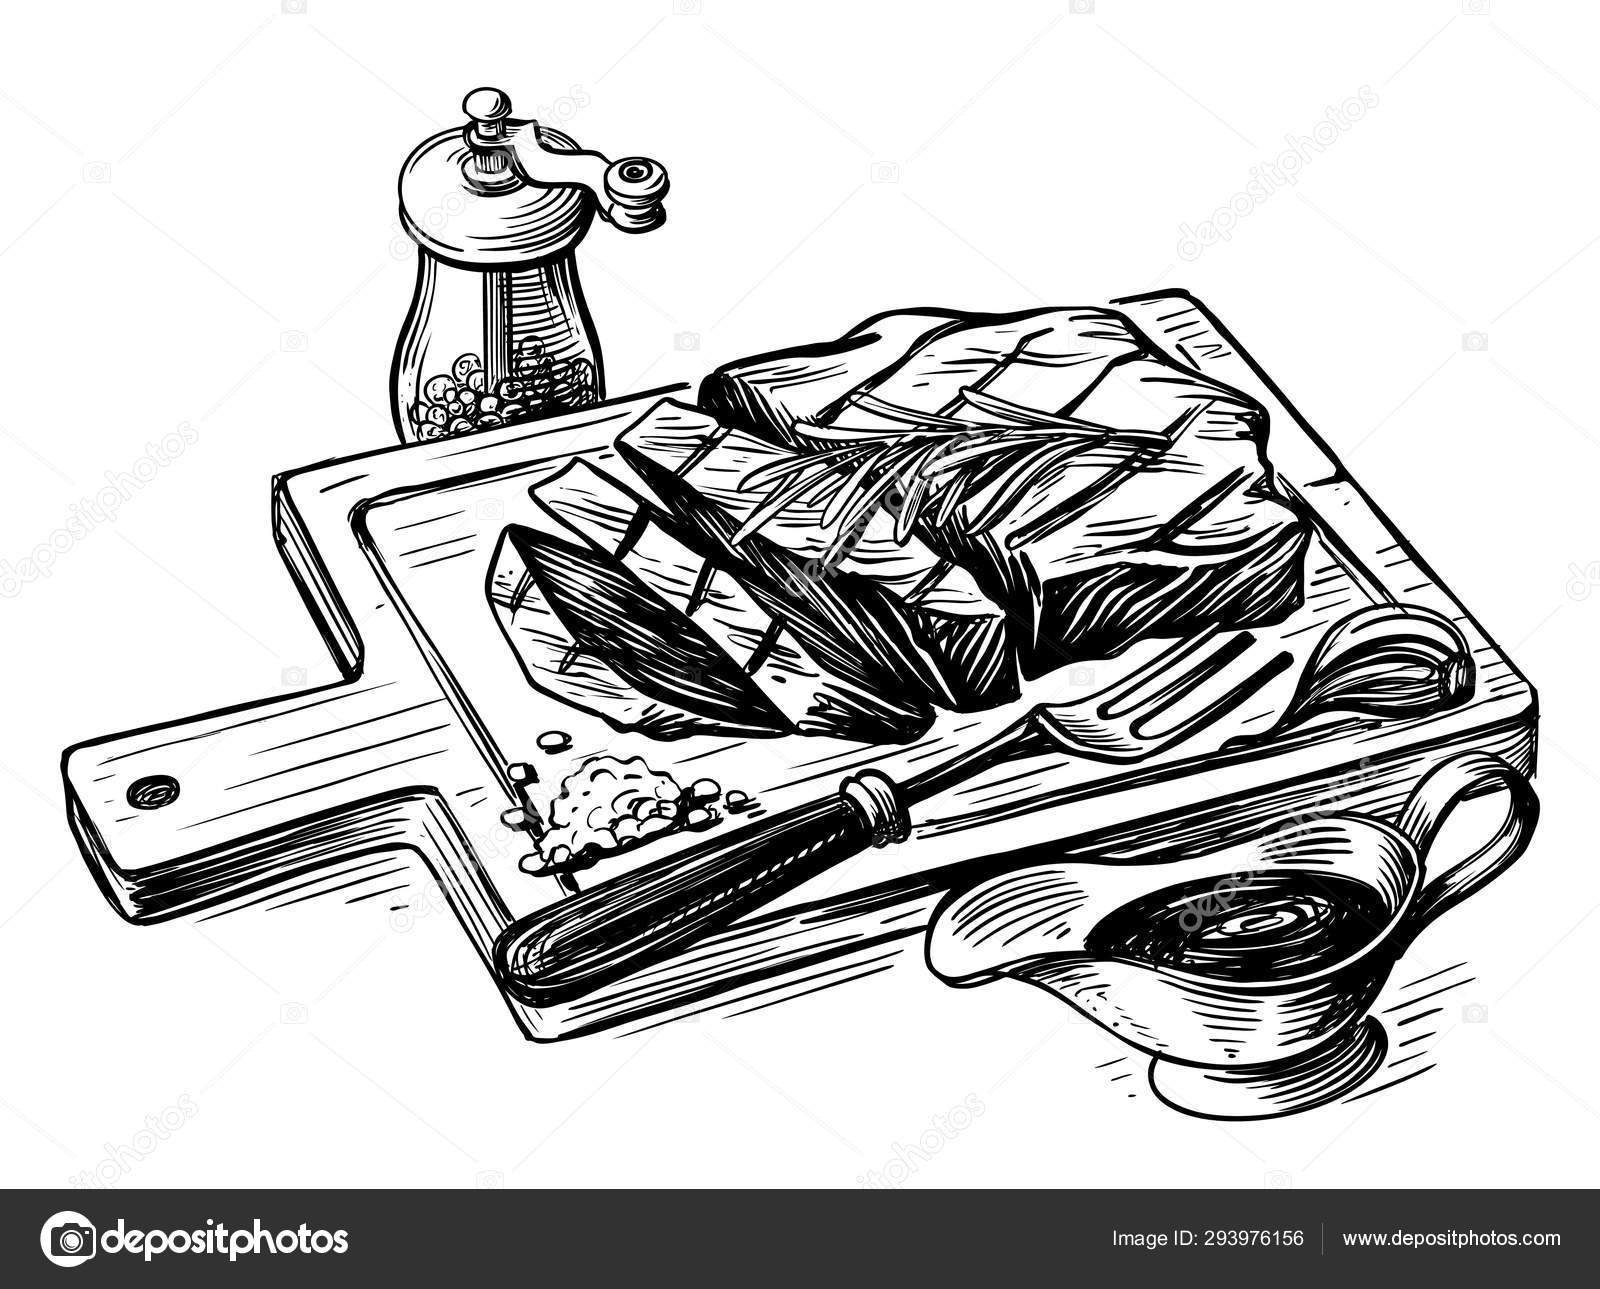 Sketch Of A Steak Set Stock Photo, Picture and Royalty Free Image. Image  115928720.